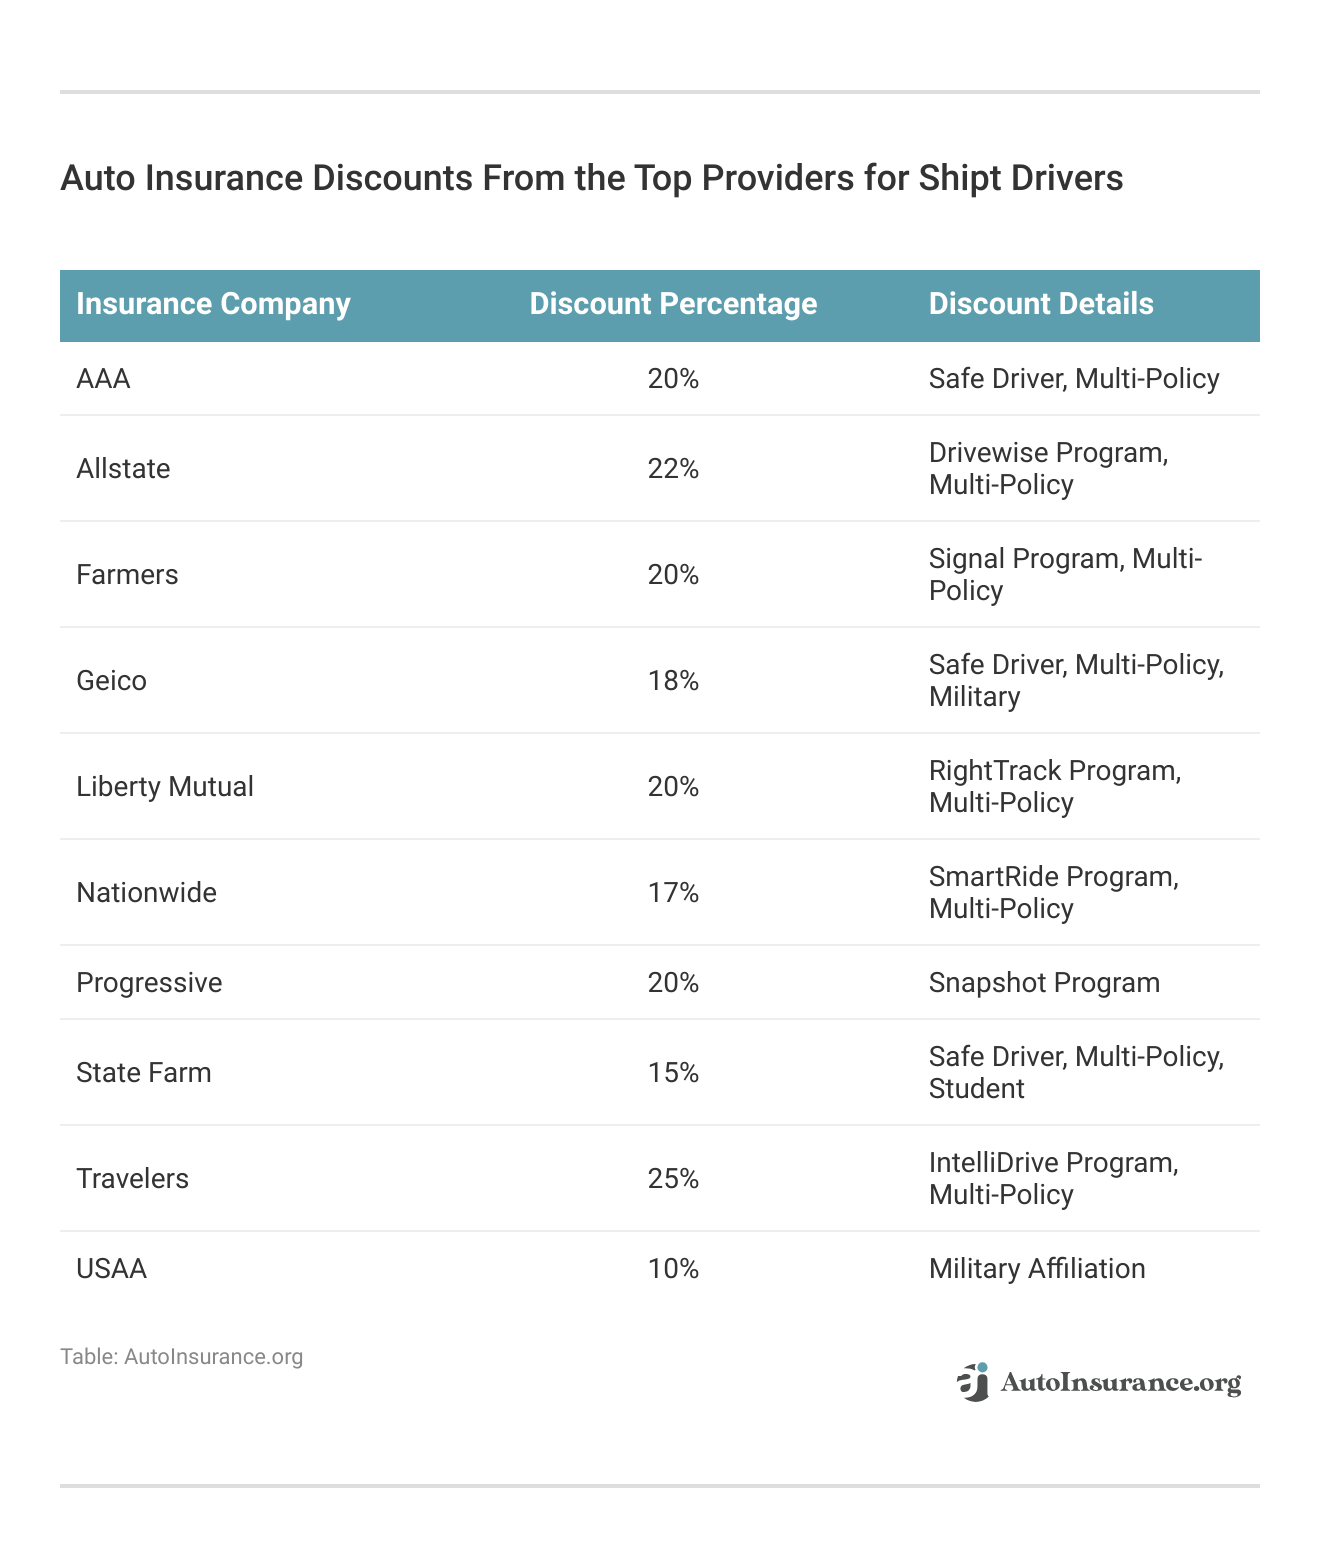 <h3>Auto Insurance Discounts From the Top Providers for Shipt Drivers</h3>